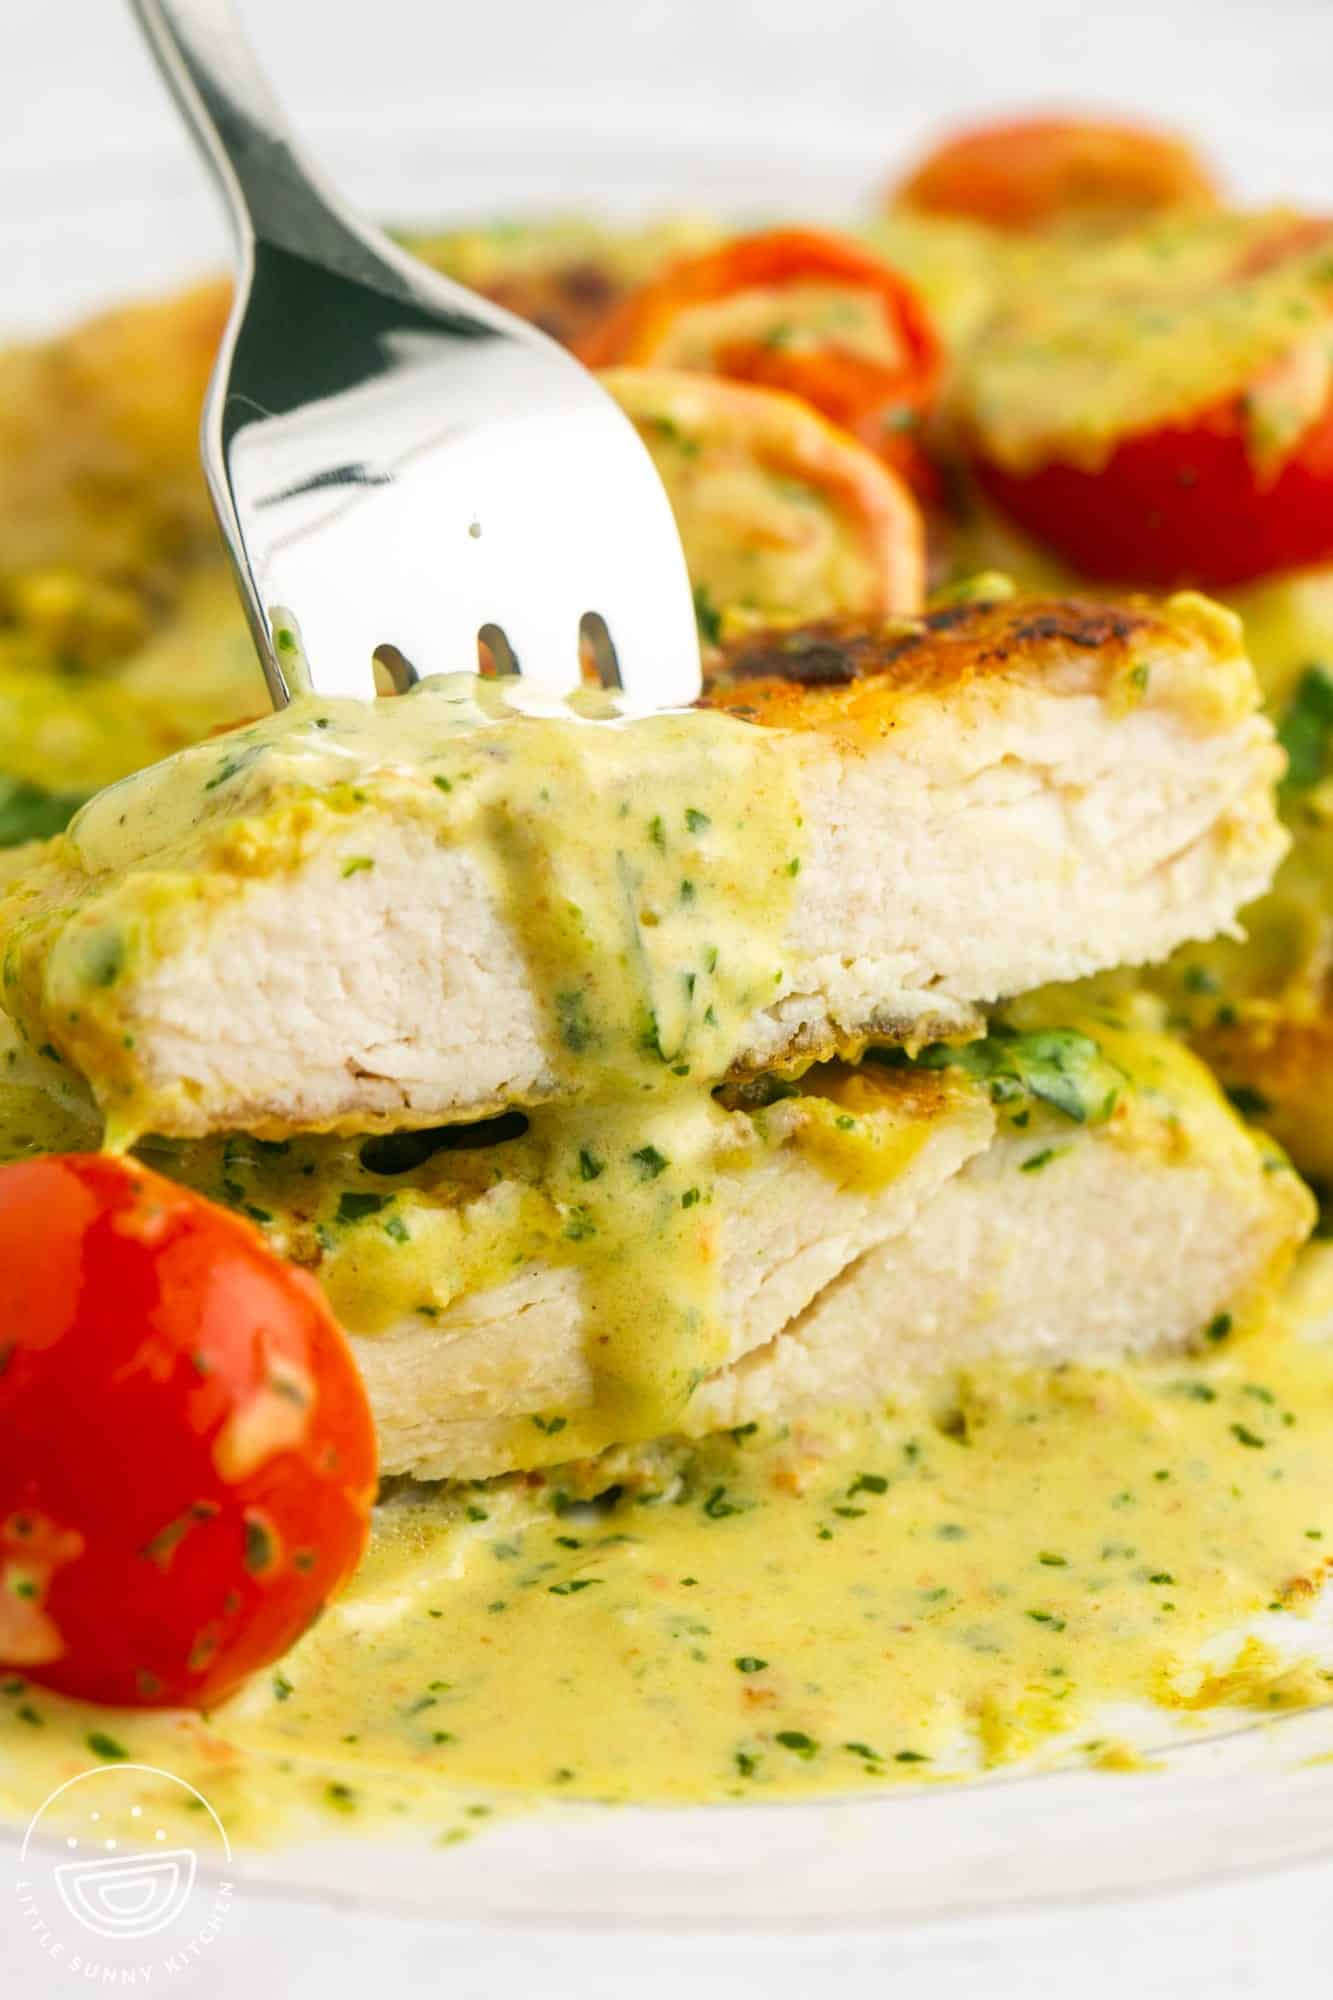 two slices of chicken held with a fork on a plate. The chicken is coated with a creamy pesto sauce.